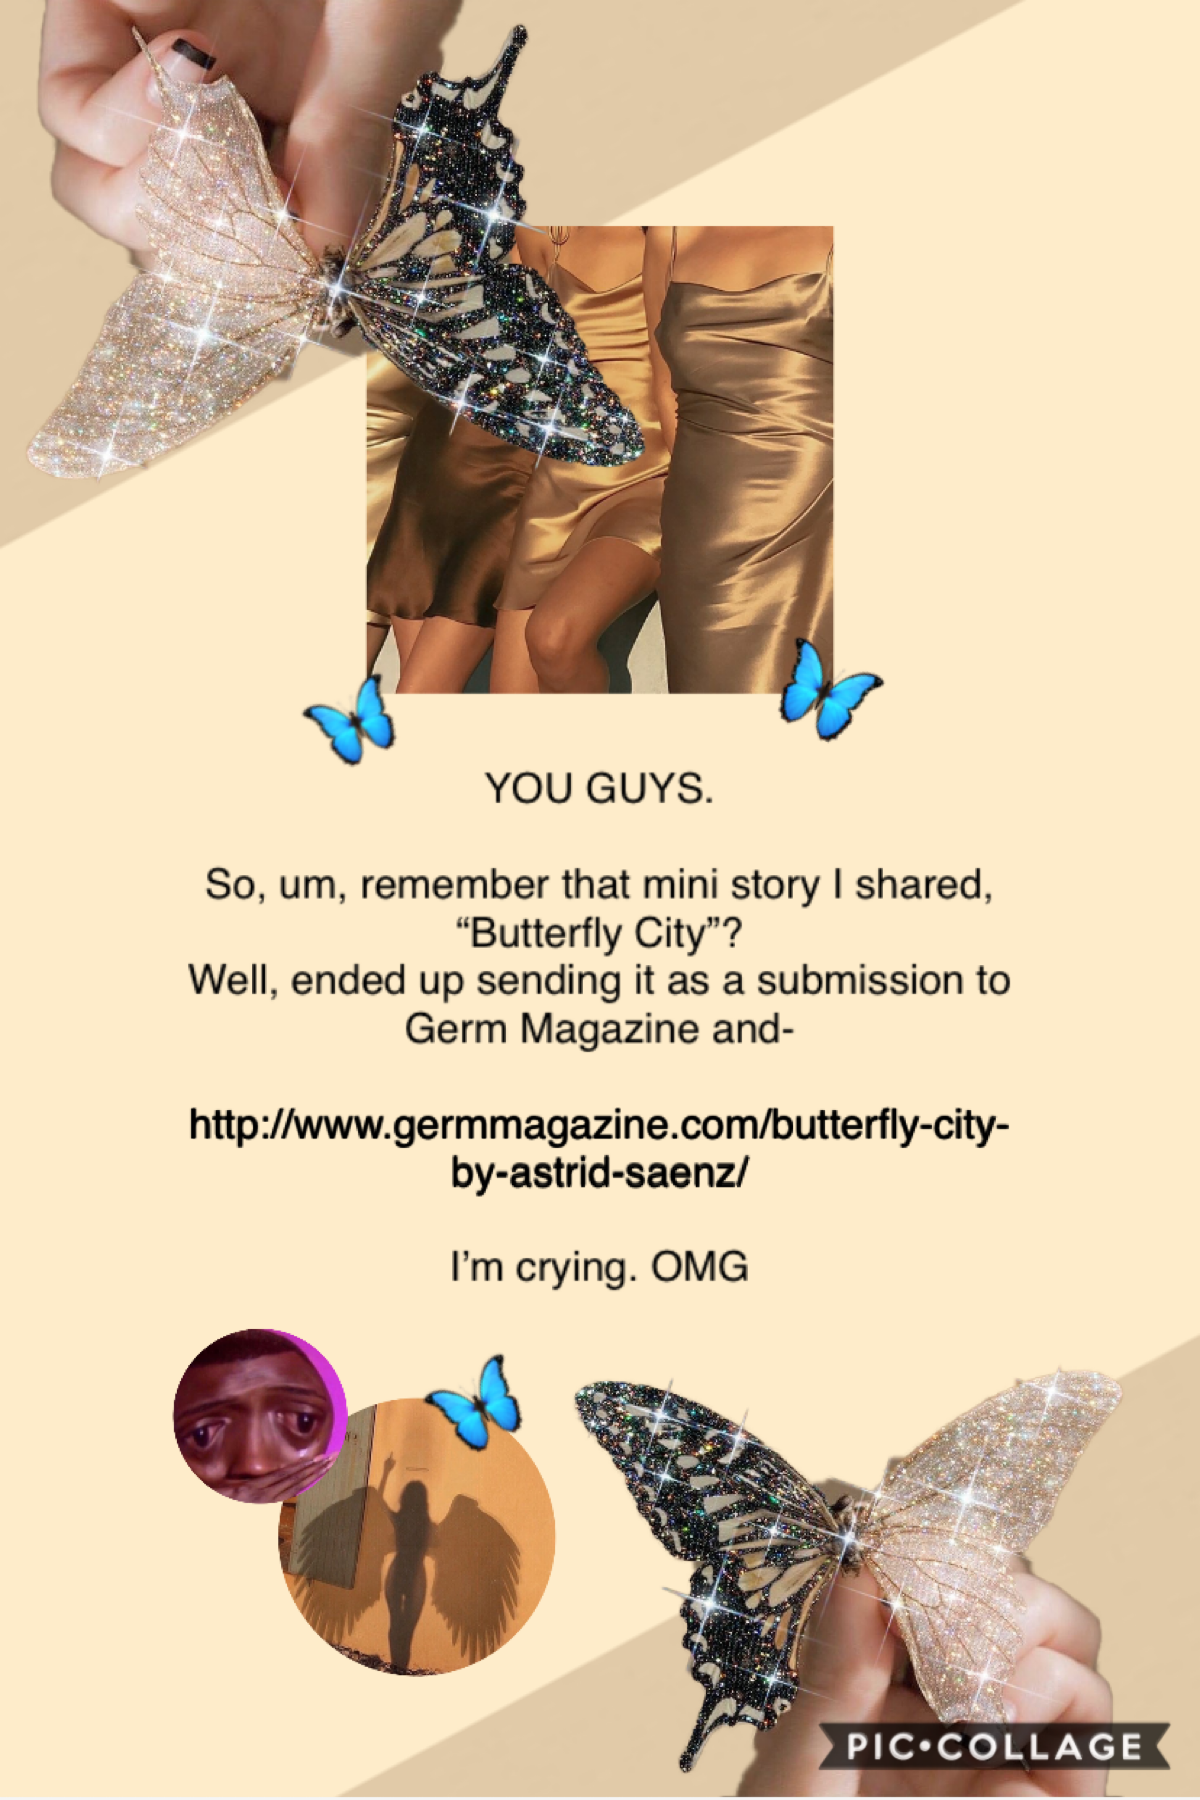 brooou i can’t EVEN 🤧💖😭🦋 http://www.germmagazine.com/butterfly-city-by-astrid-saenz/